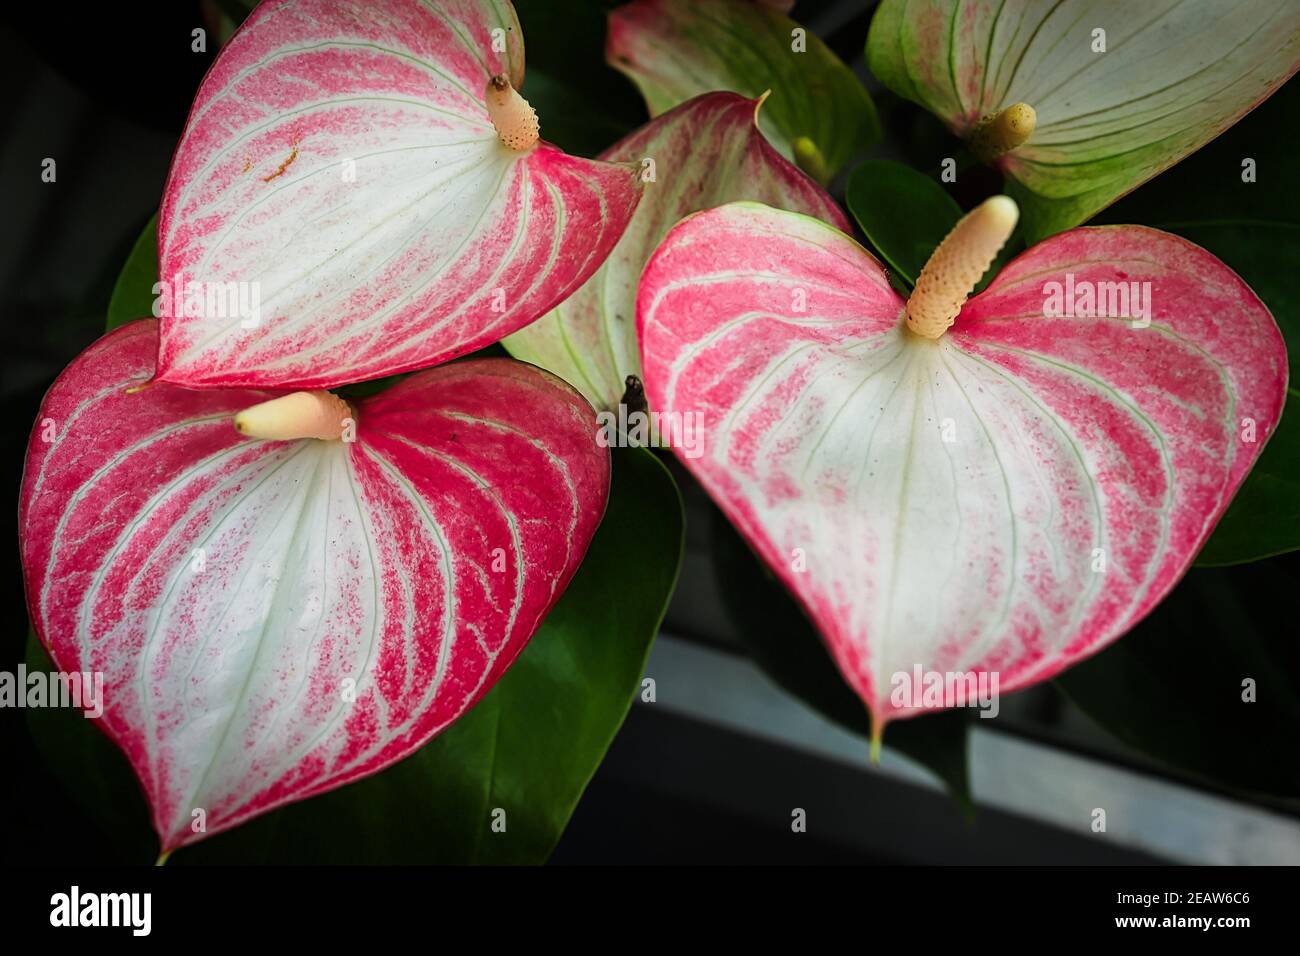 Three pink and white anthuriums growing on a plant Stock Photo